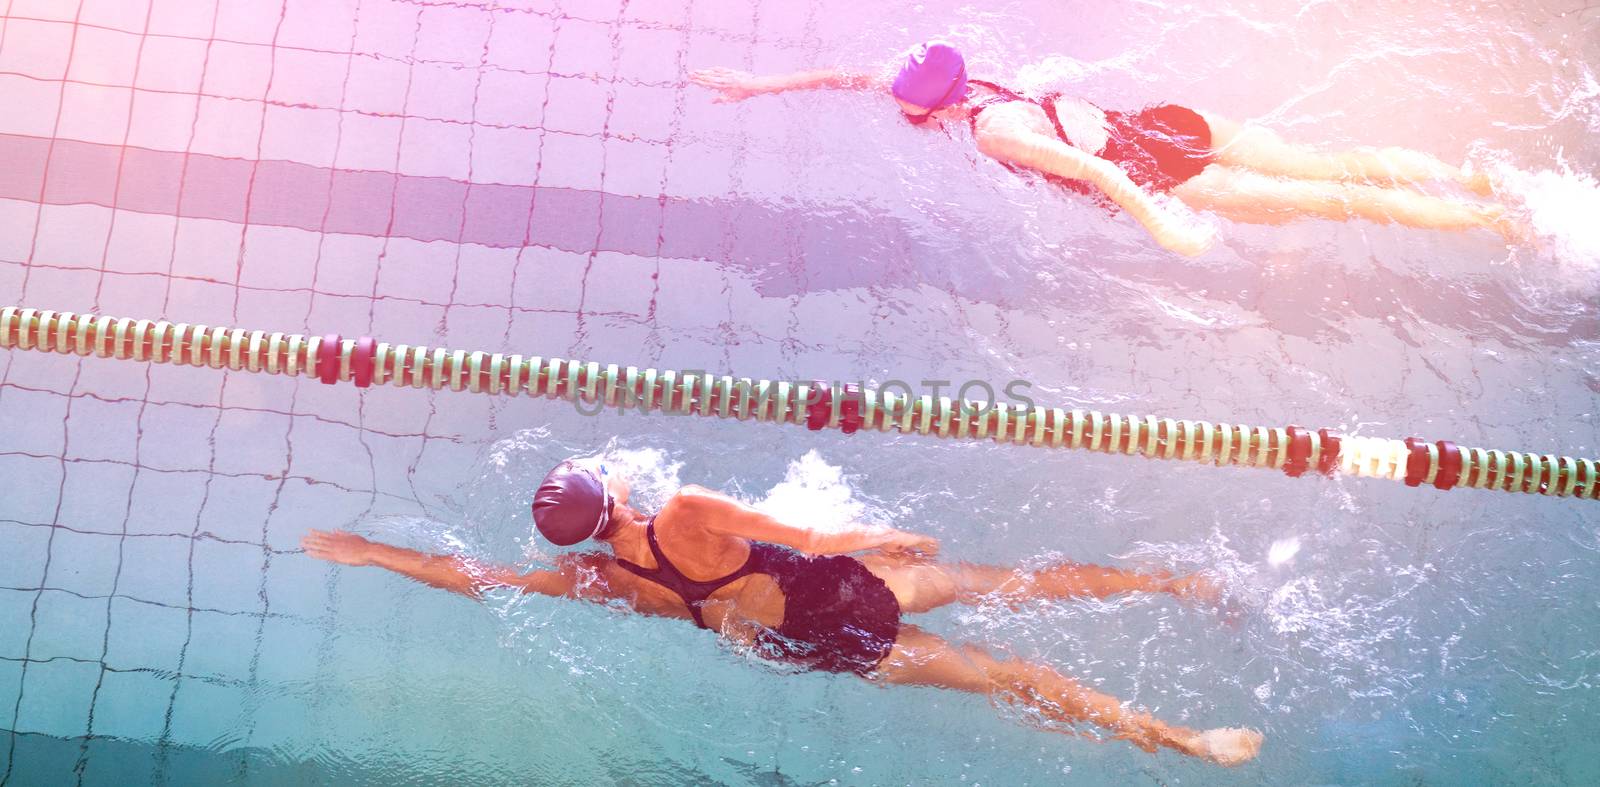 Female swimmers racing in the swimming pool at the leisure center